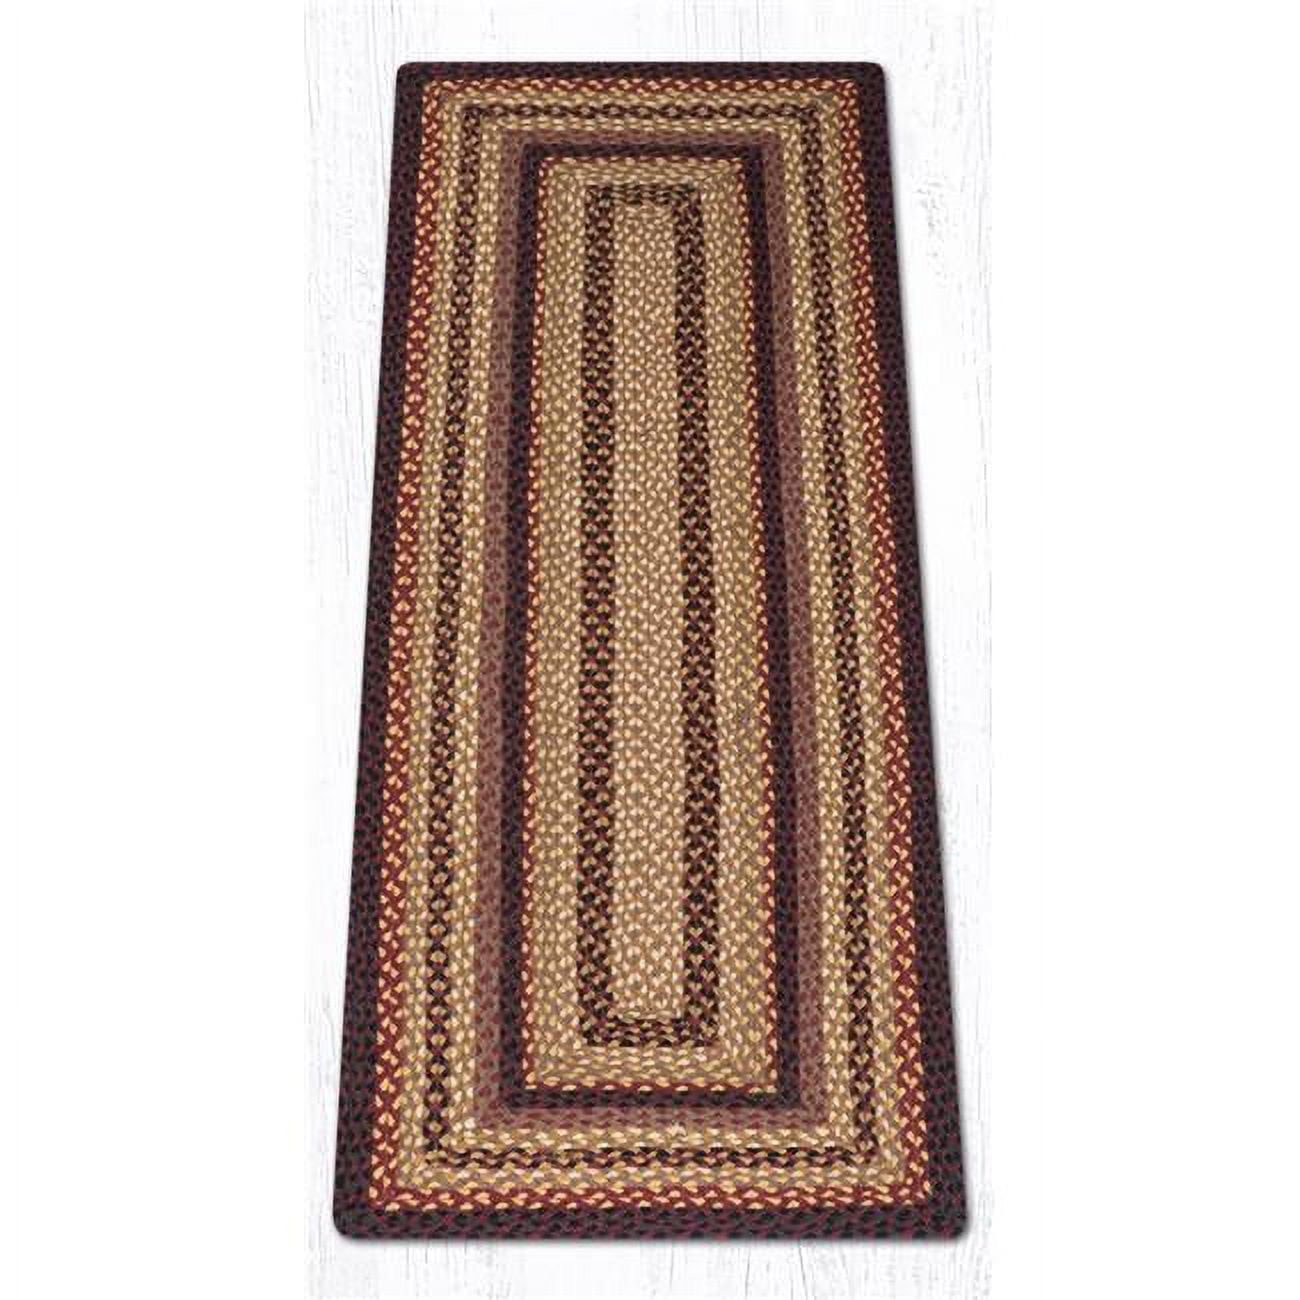 Capitol Importing 08-371 2 X 6 Ft. Oblong Braided Rug, Black Cherry, Chocolate & Cream